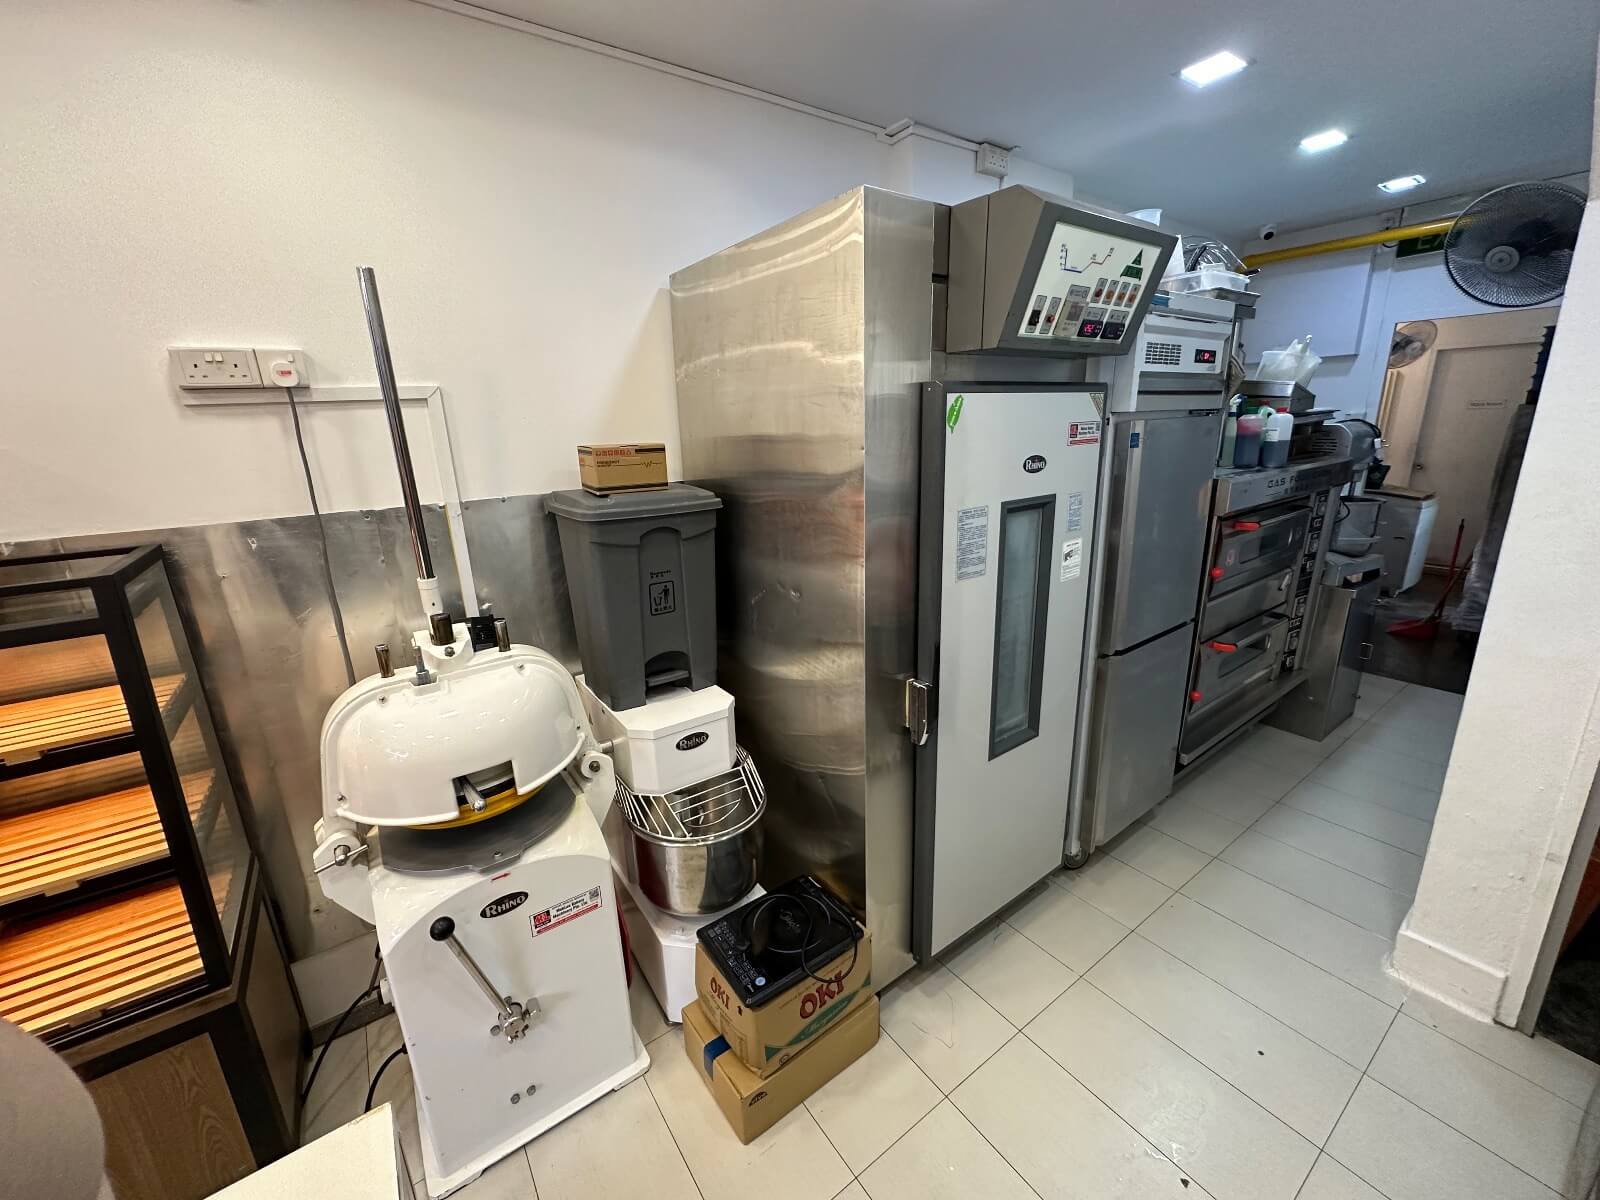 Great Opportunity To Own A Bakery With Full Equipment Situated In A Good Location!